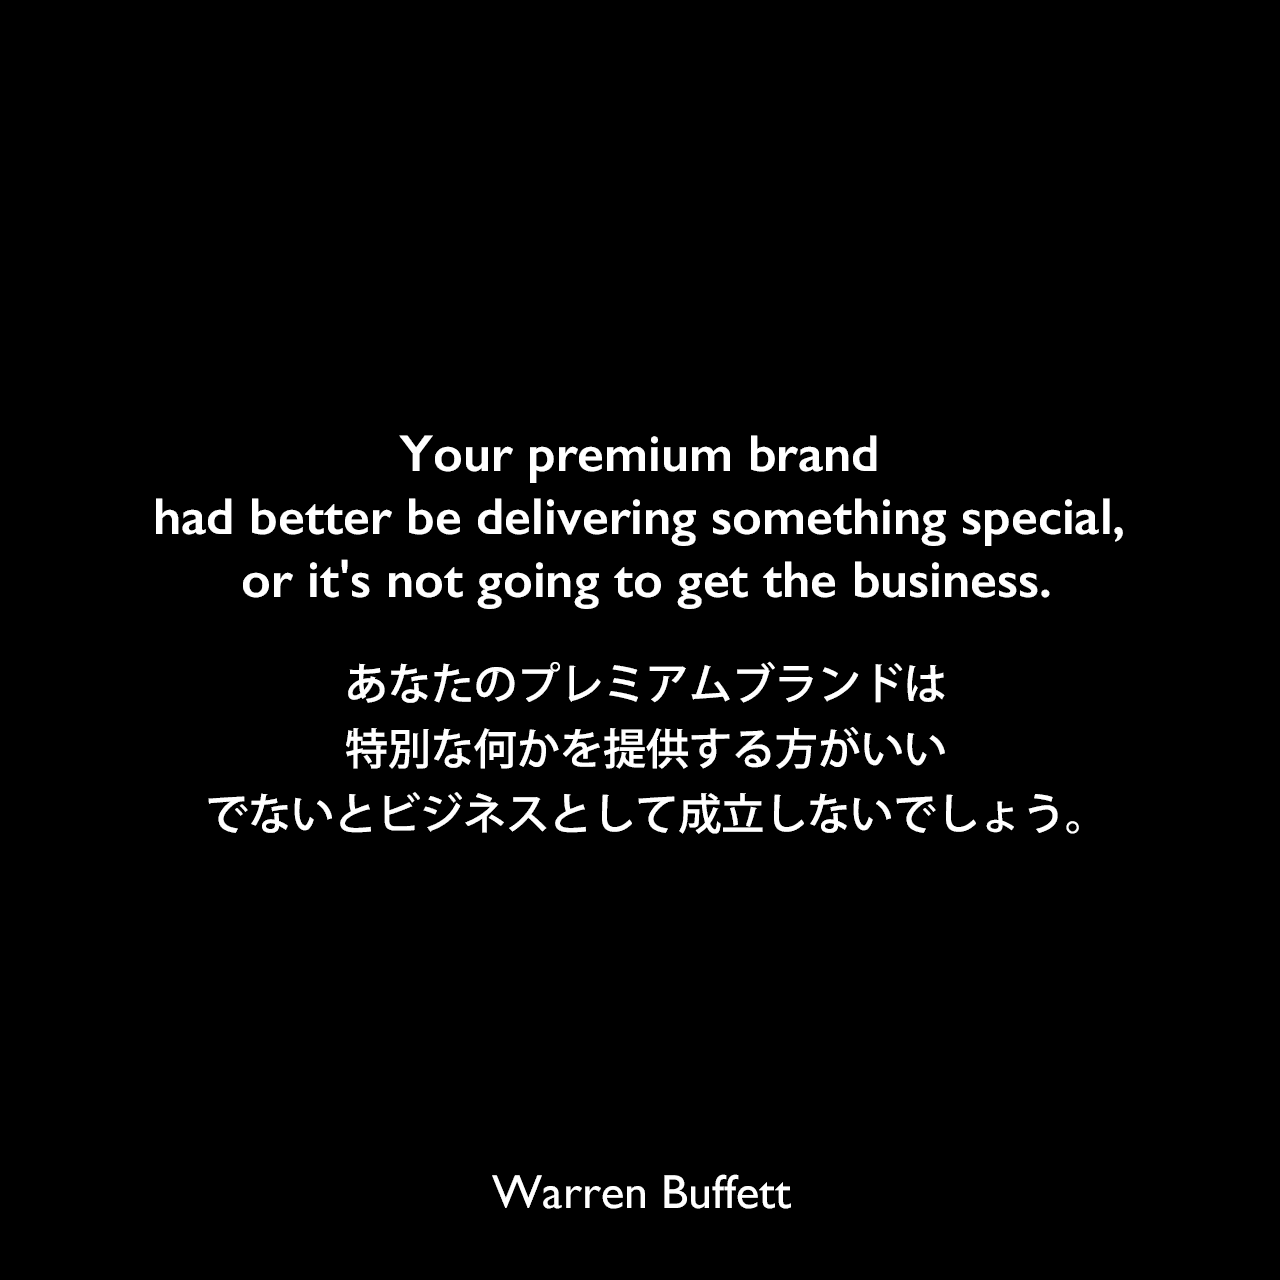 Your premium brand had better be delivering something special, or it's not going to get the business.あなたのプレミアムブランドは特別な何かを提供する方がいい、でないとビジネスとして成立しないでしょう。Warren Buffett